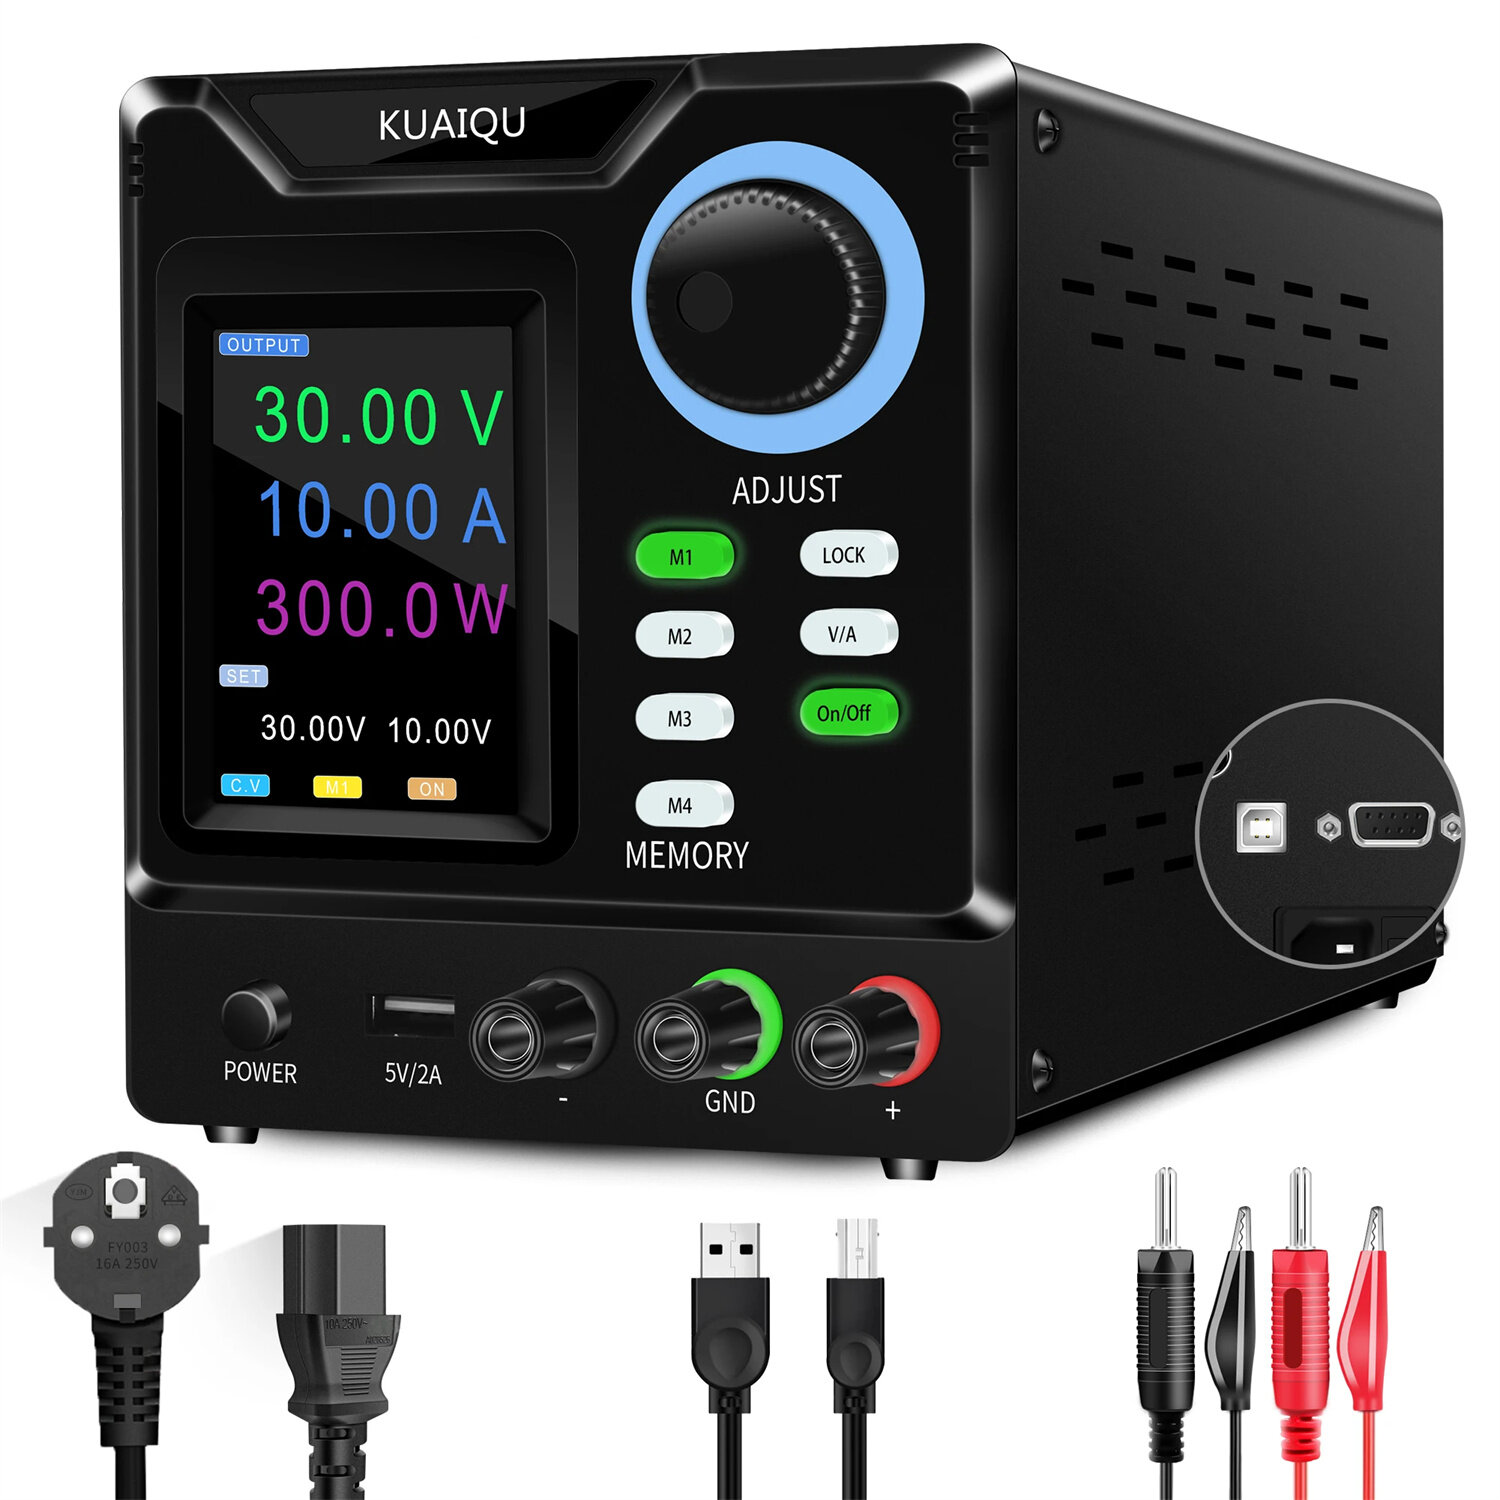 

KUAIQU Programmable DC Power Supply Adjustable 305/3010/605/1203 with HD 4-Digit Color Display Precise Encoder Knobs USB